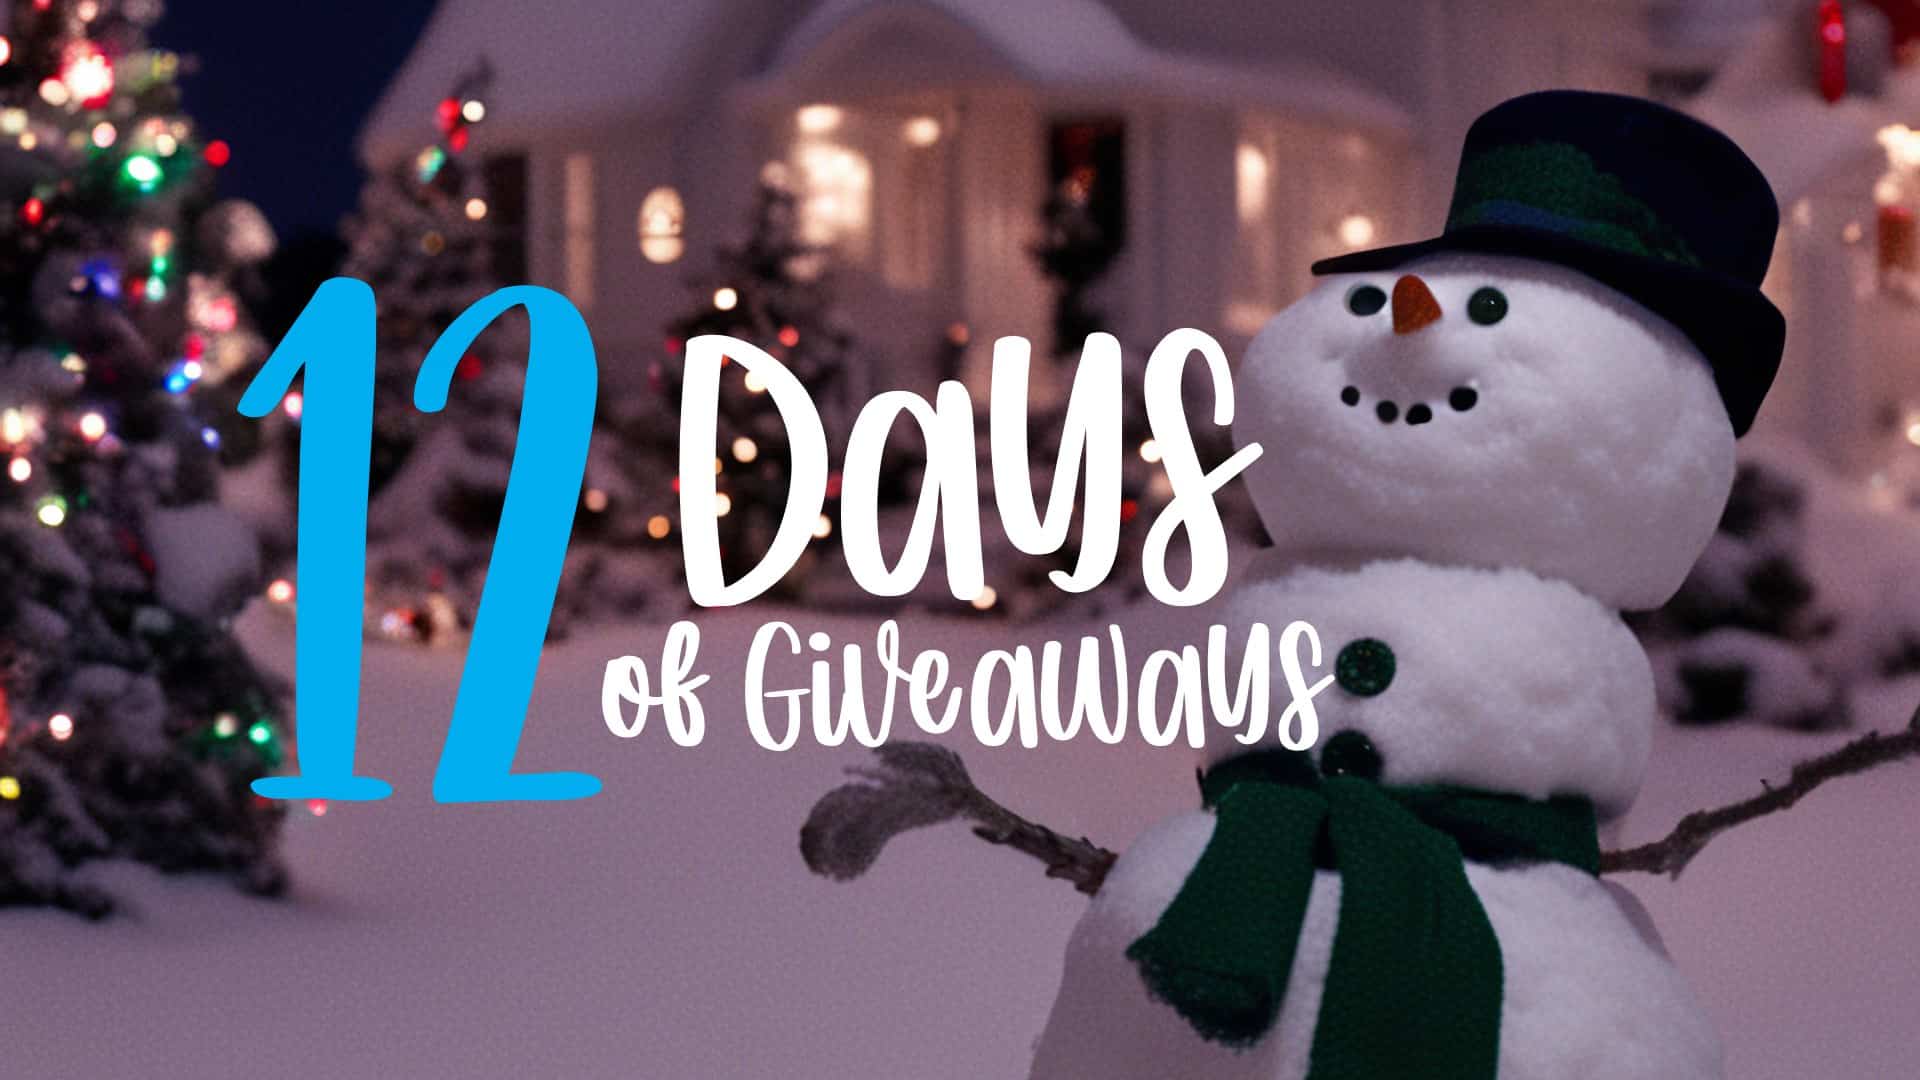 Velocity presents 12 Days of Giveaways this Holiday Season